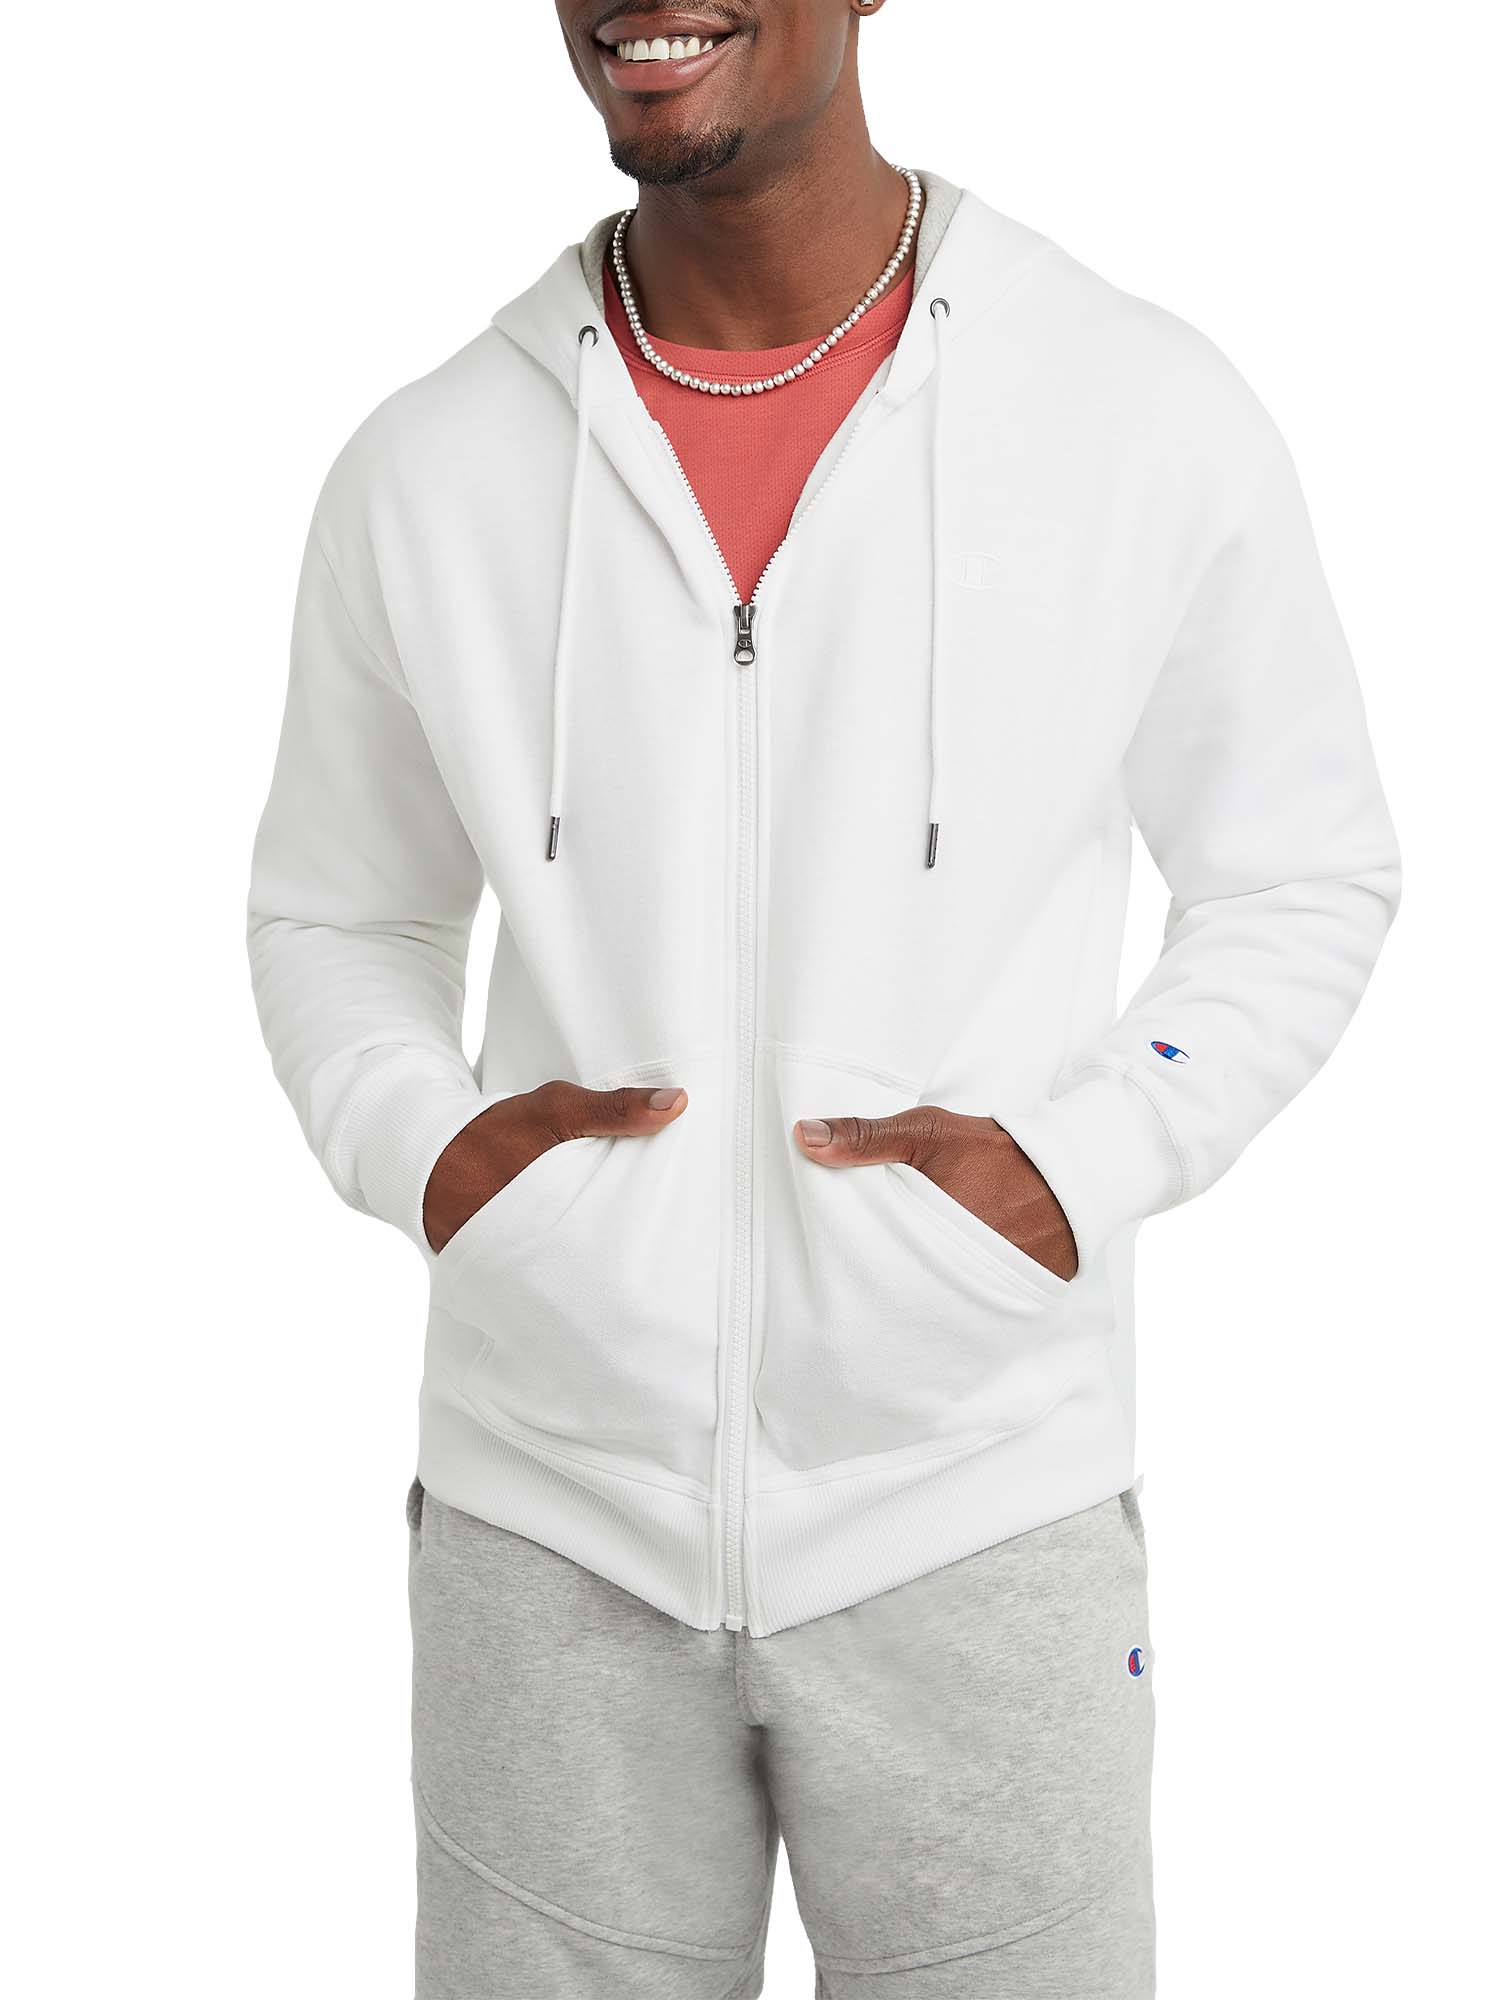 Champion Men's and Big Men's Powerblend Zip-Up Hoodie, Sizes up to 2XL - image 1 of 7